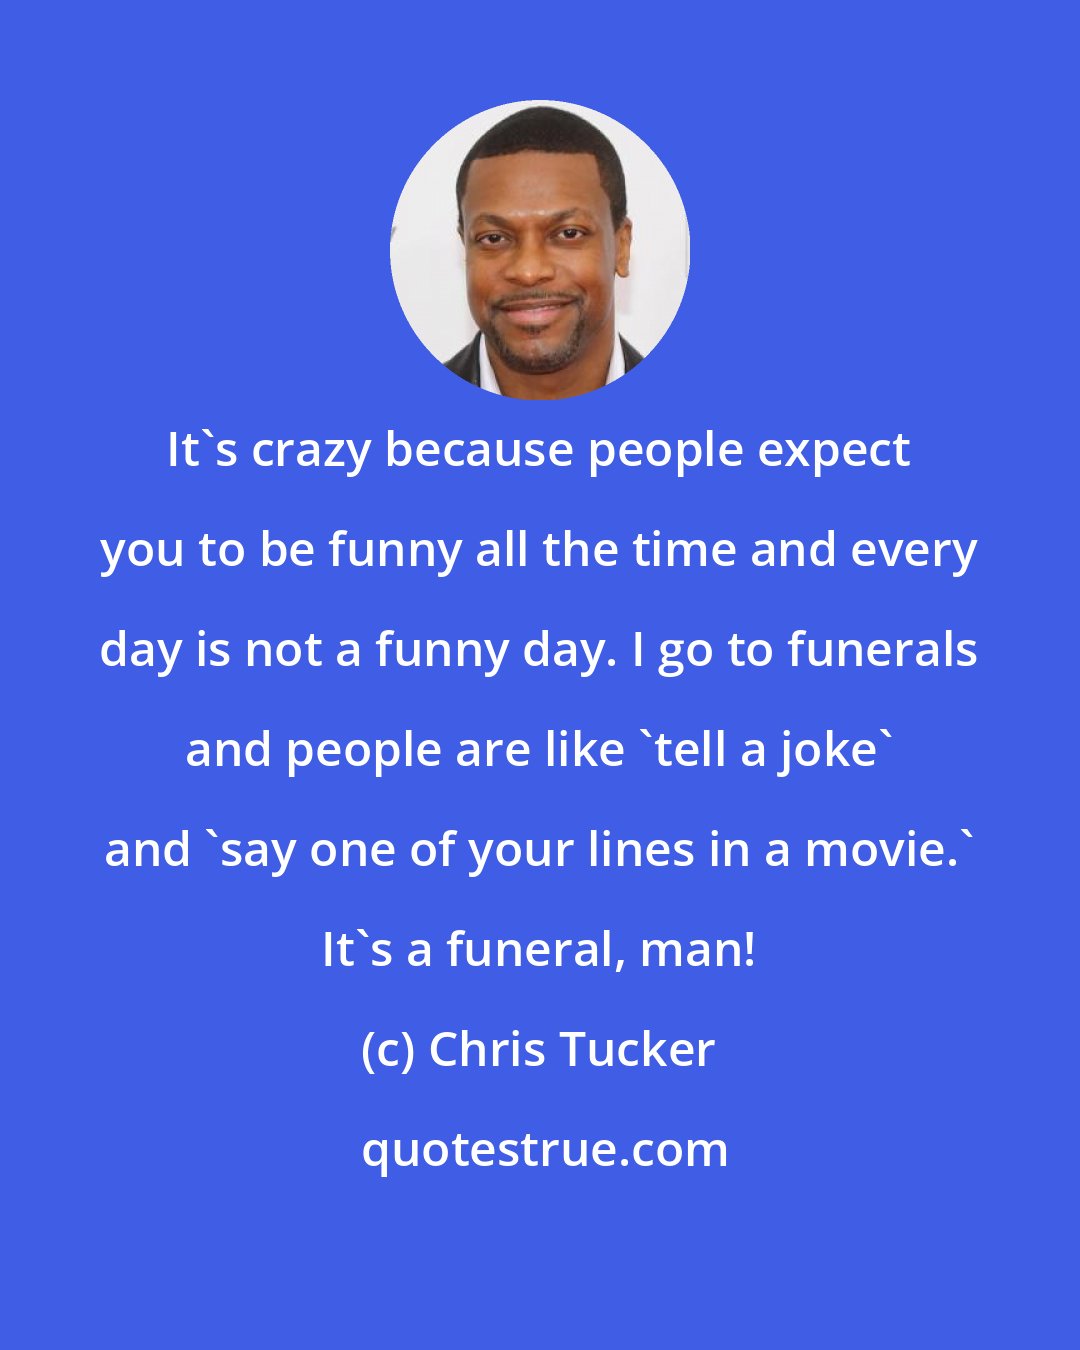 Chris Tucker: It's crazy because people expect you to be funny all the time and every day is not a funny day. I go to funerals and people are like 'tell a joke' and 'say one of your lines in a movie.' It's a funeral, man!